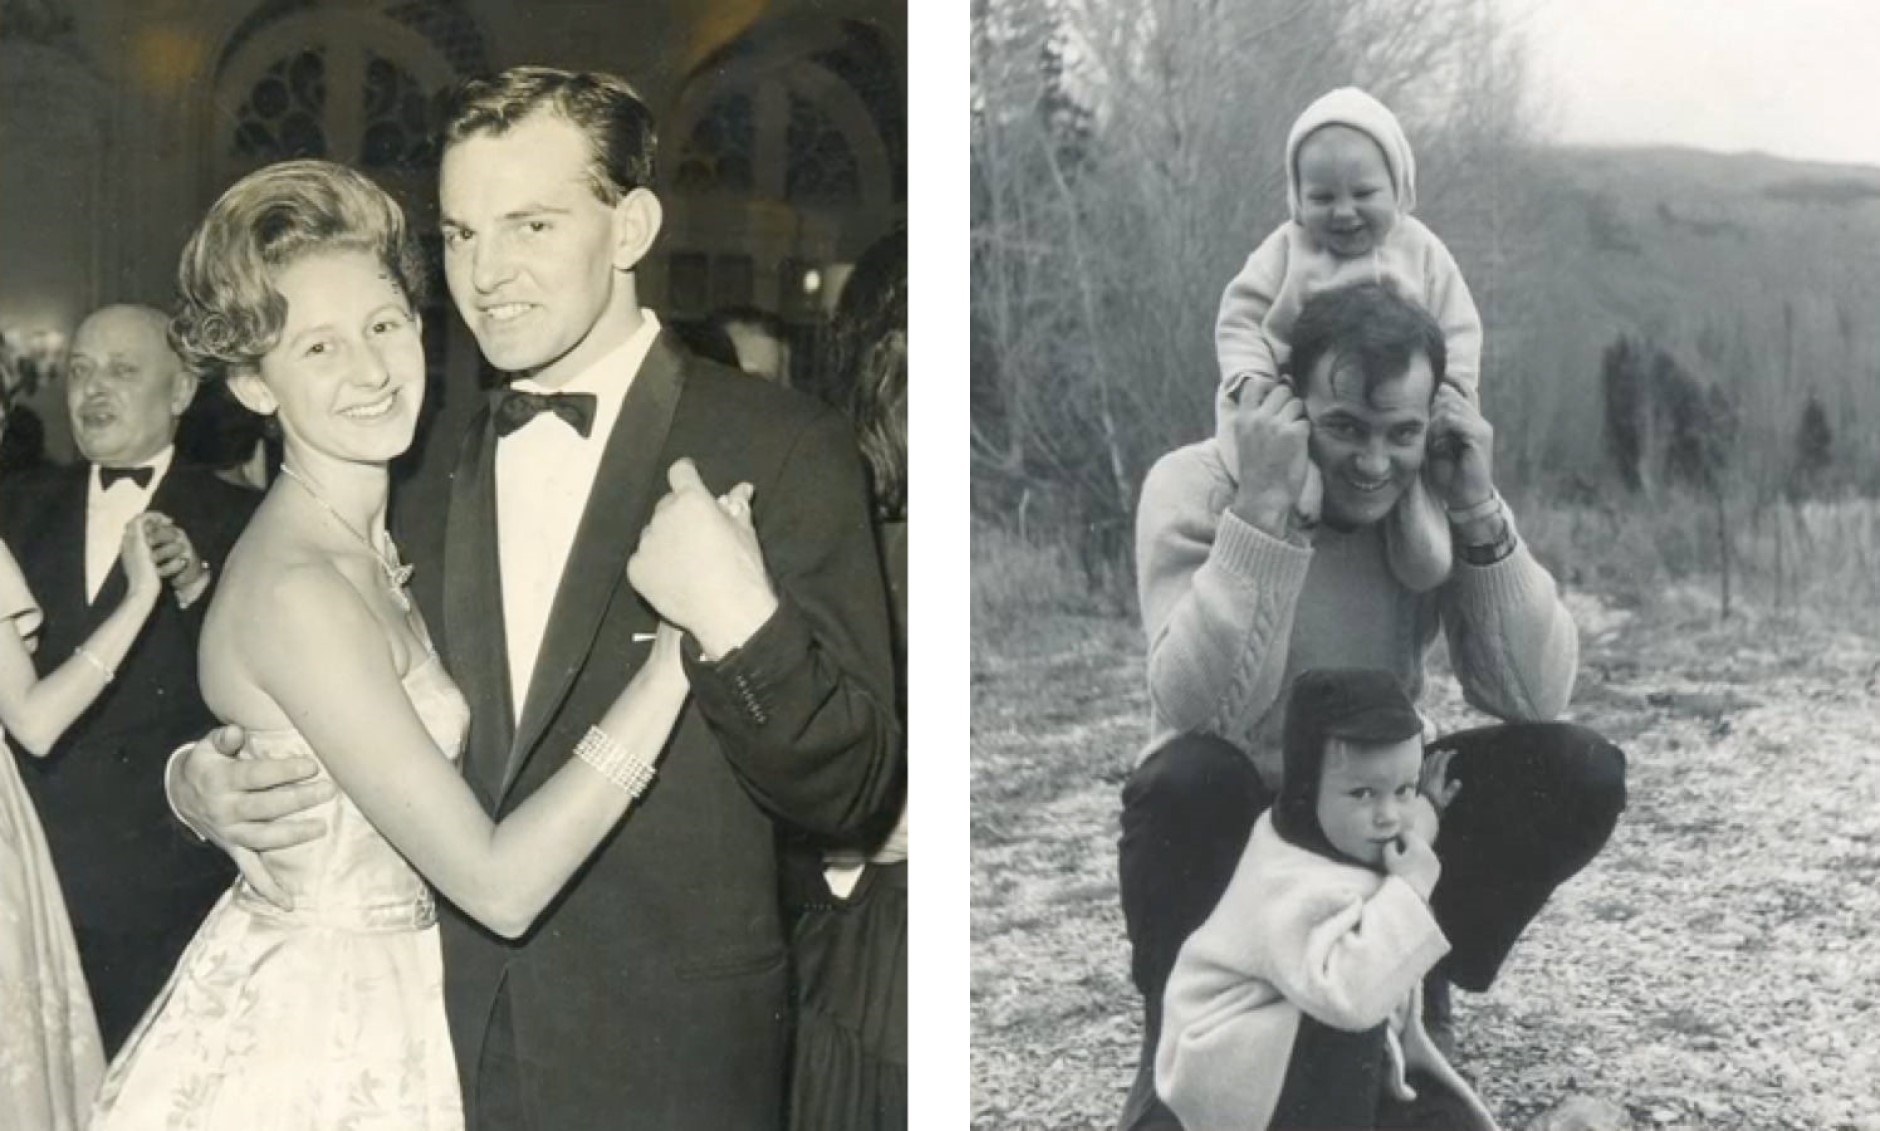 Left, man and woman dancing at black tie event. Right, man with child on his shoulders and child at feet.